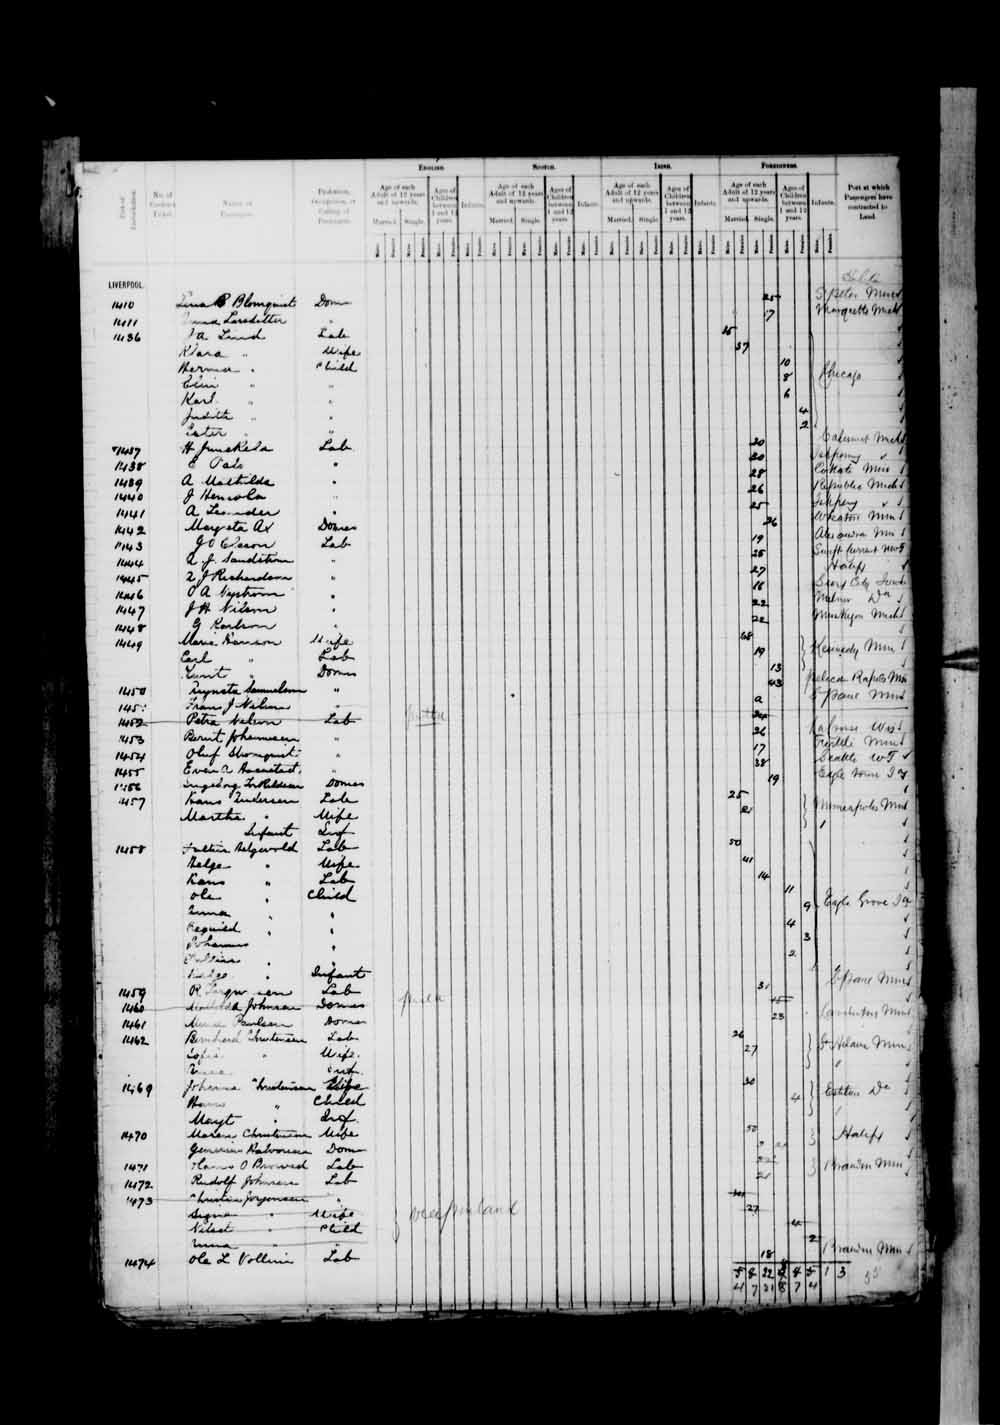 Digitized page of Passenger Lists for Image No.: e003674938